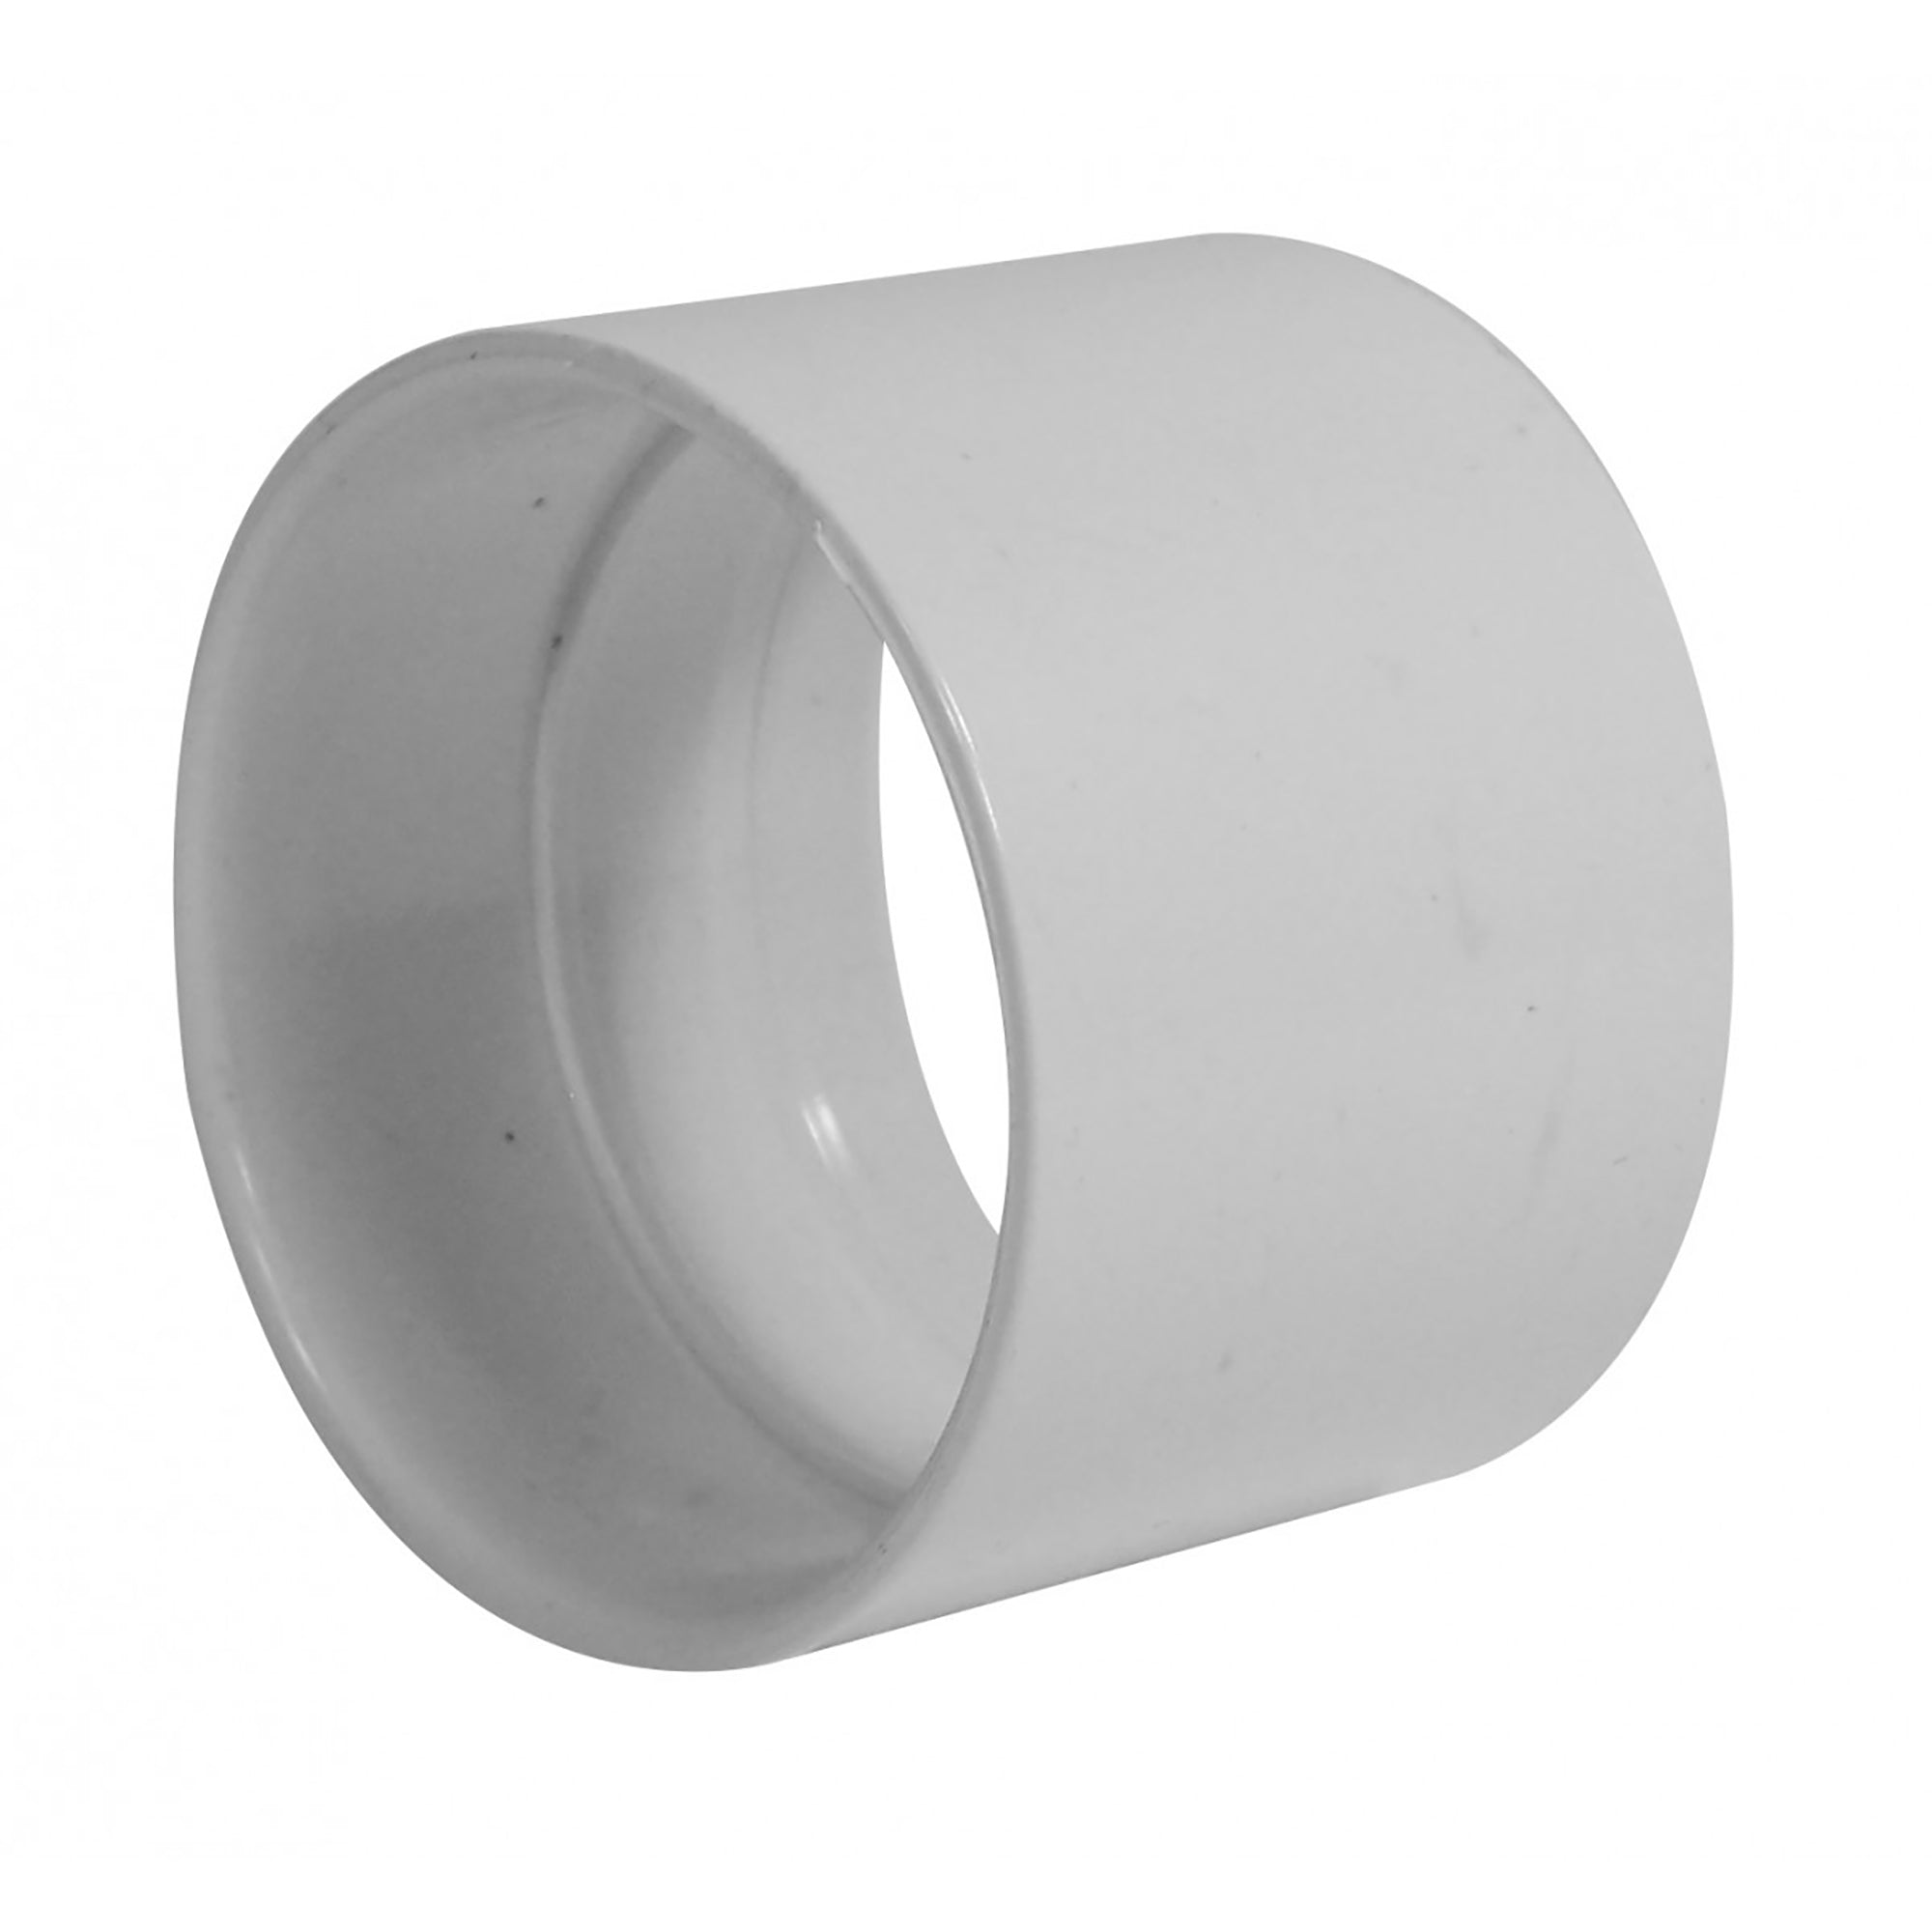 Stop Coupling for Pipe 2'' - Fitting for Central Vacuum Installation - White